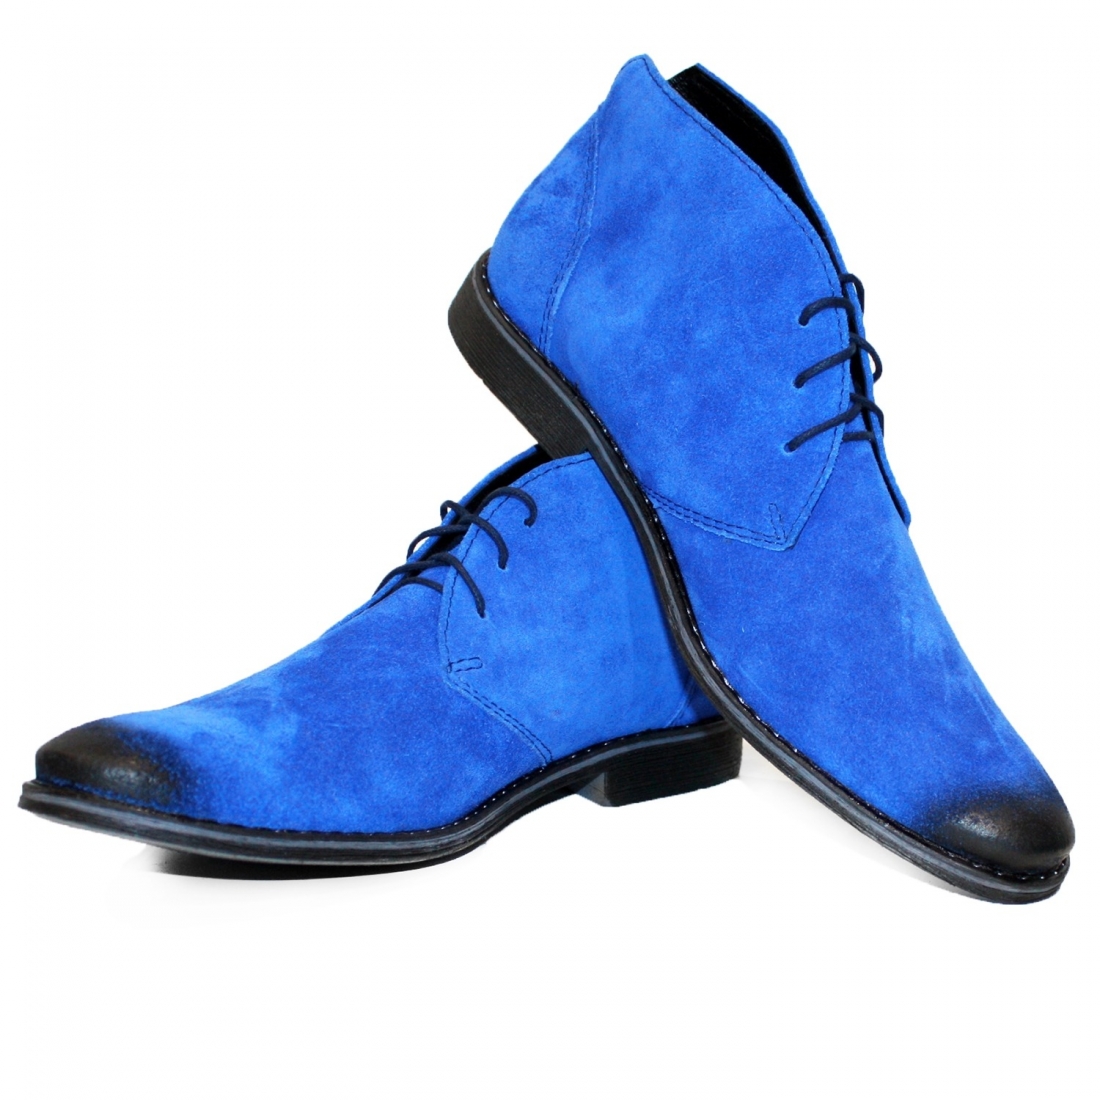 Modello Bilgetto - Navy Blue Lace-Up Ankle Chukka Boots - Cowhide Suede